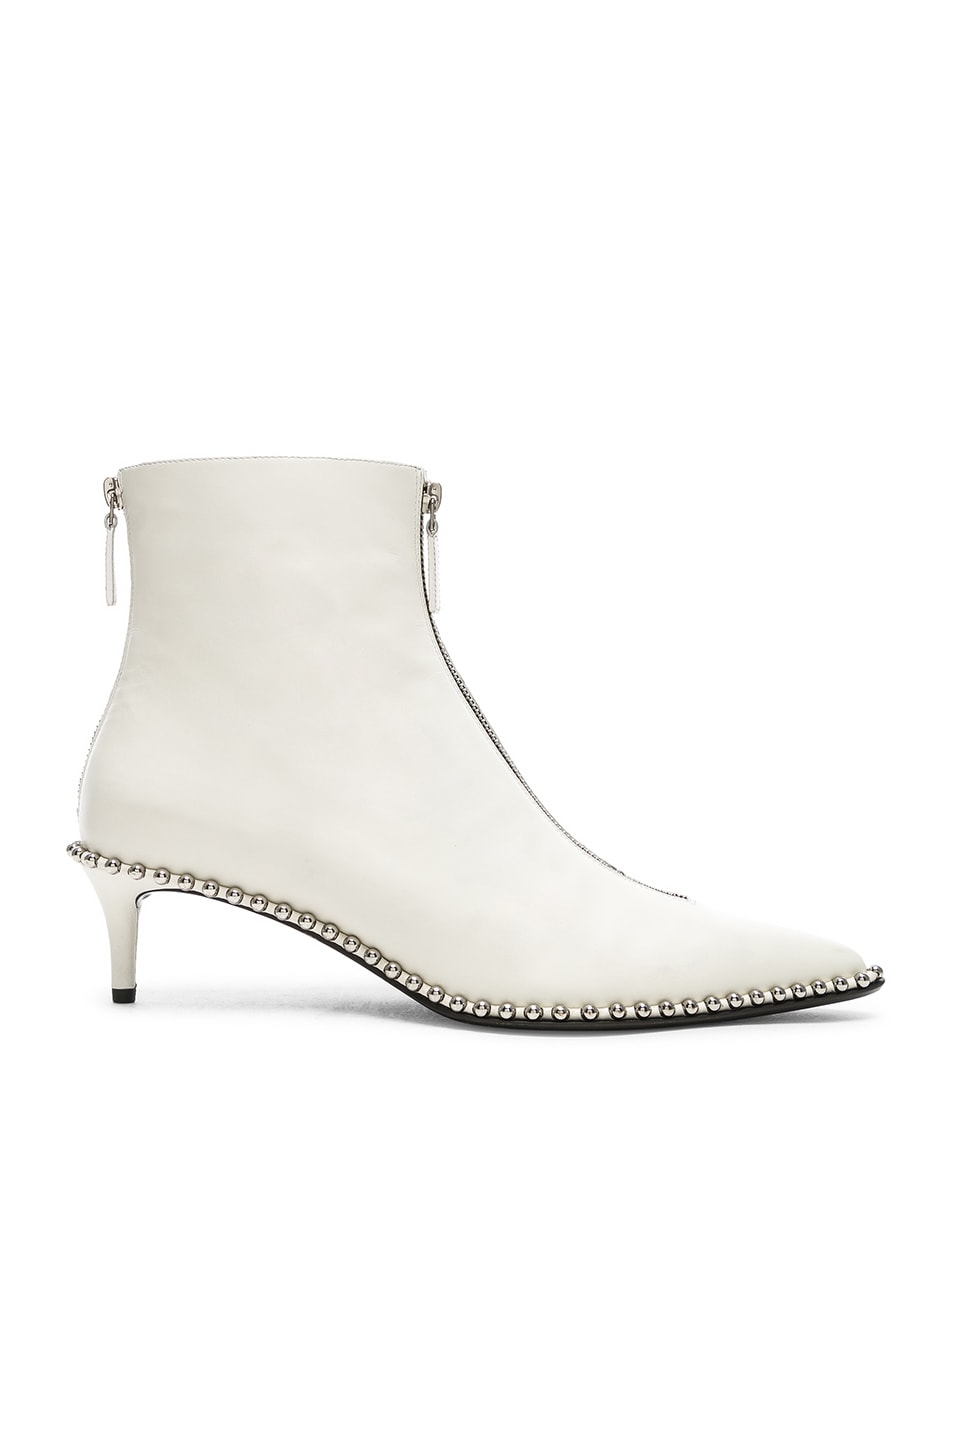 Image 1 of Alexander Wang Leather Eri Low Boots in White